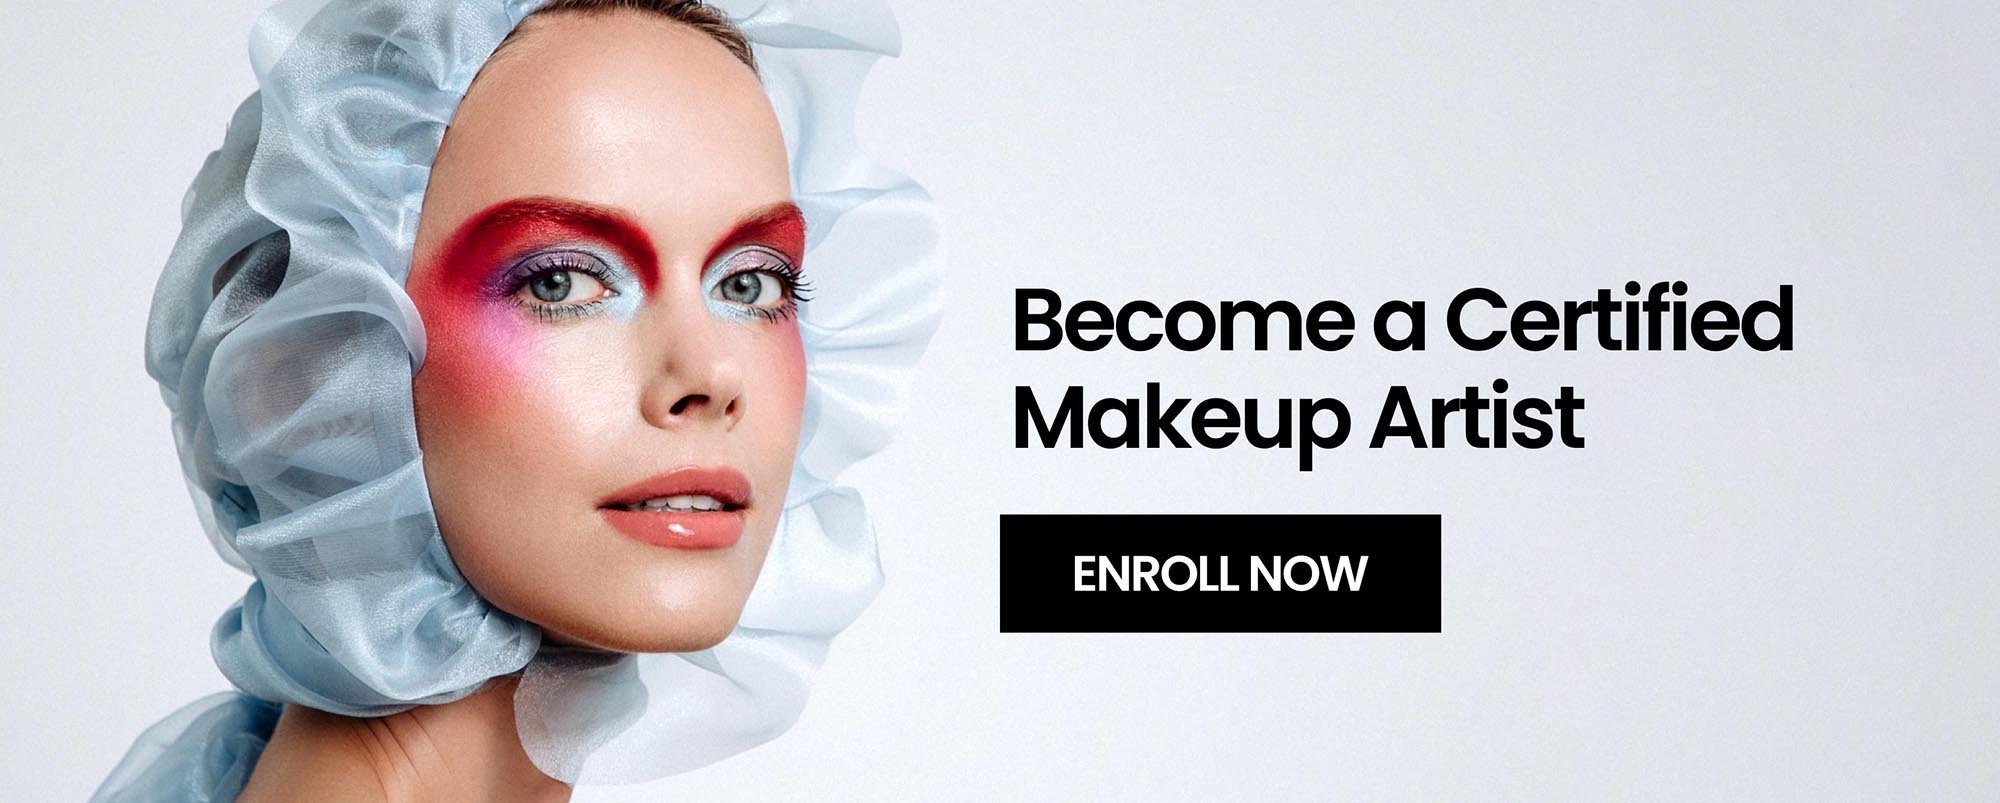 Professional Makeup Artistry: How To Become One & Career Options